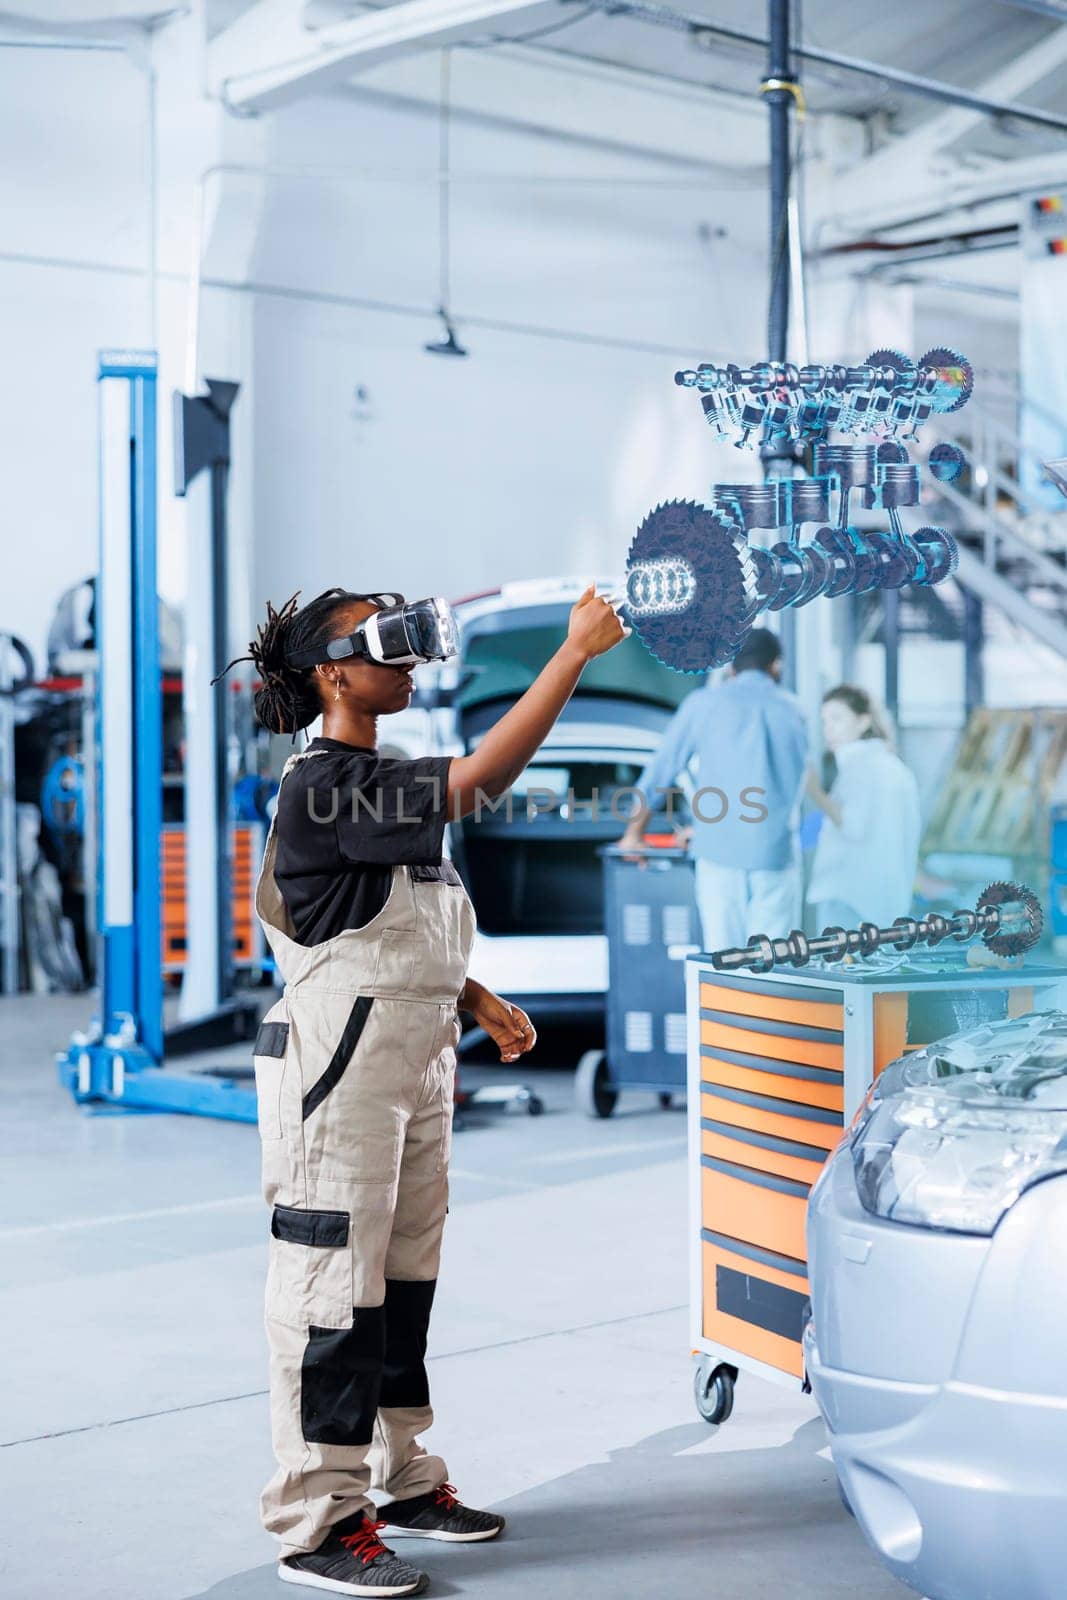 Qualified engineer in repair shop using VR googles and augmented reality hologram to visualize car parts in order to fix them. BIPOC woman using AR technology while working on damaged vehicle motor